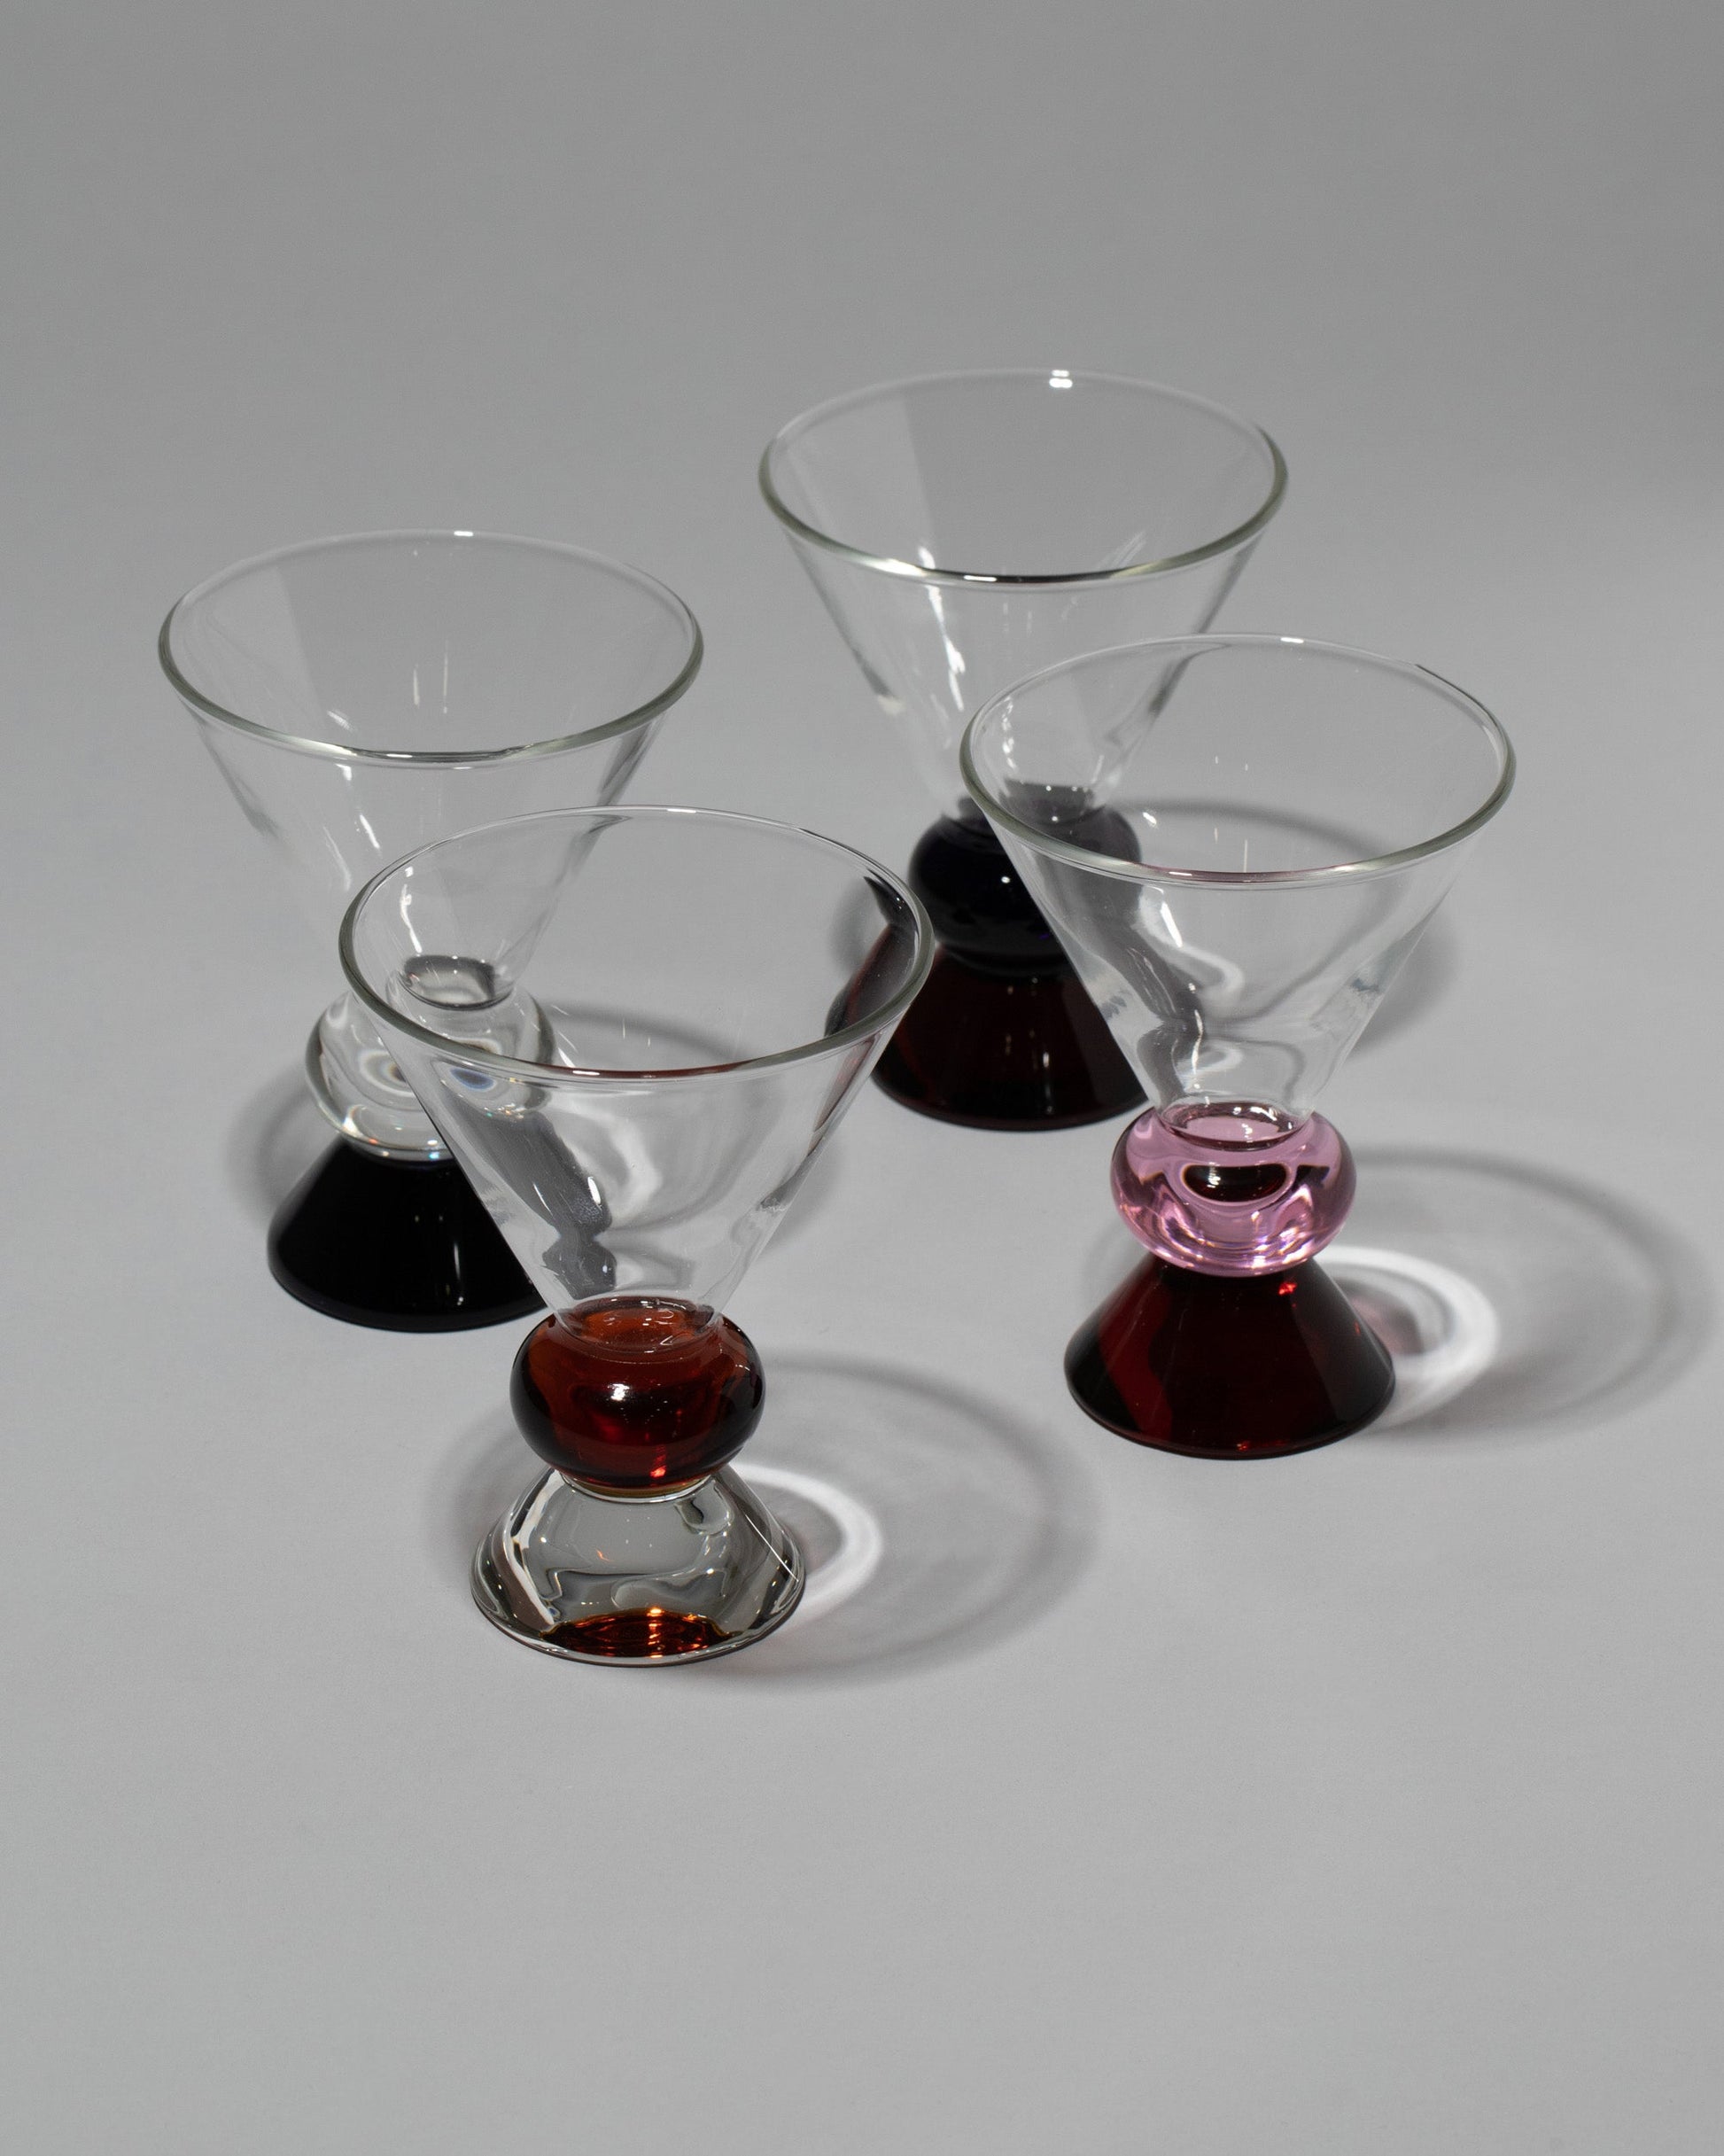 Group of Sophie Lou Jacobsen Amber & Clear, Clear & Blue, Pink & Amber and Blue & Amber Totem Glasses on light color background.